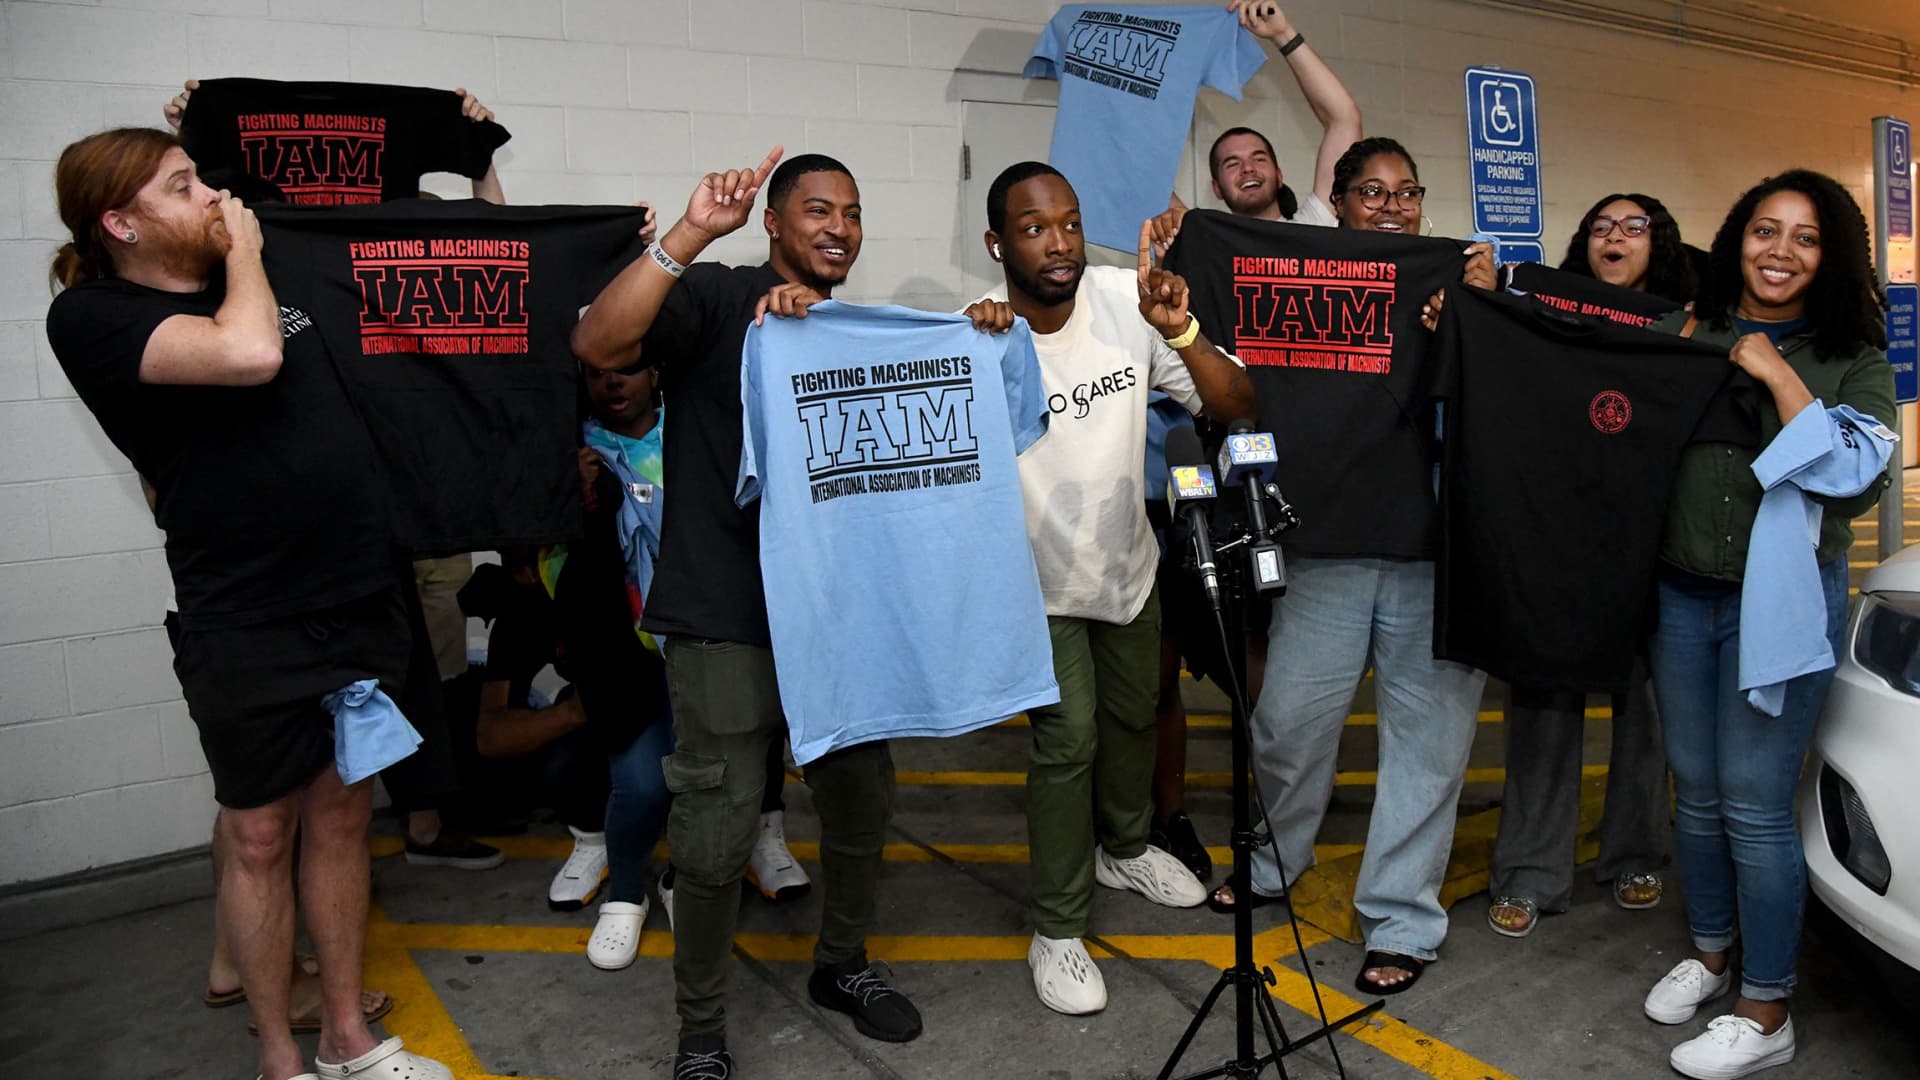 Apple store workers in Towson, Maryland, hold their new union t-shirts on June 18, 2022, after their store employees decided to join the International Association of Machinists Union. Theirs is the first Apple store in the U.S. to vote for union representation.